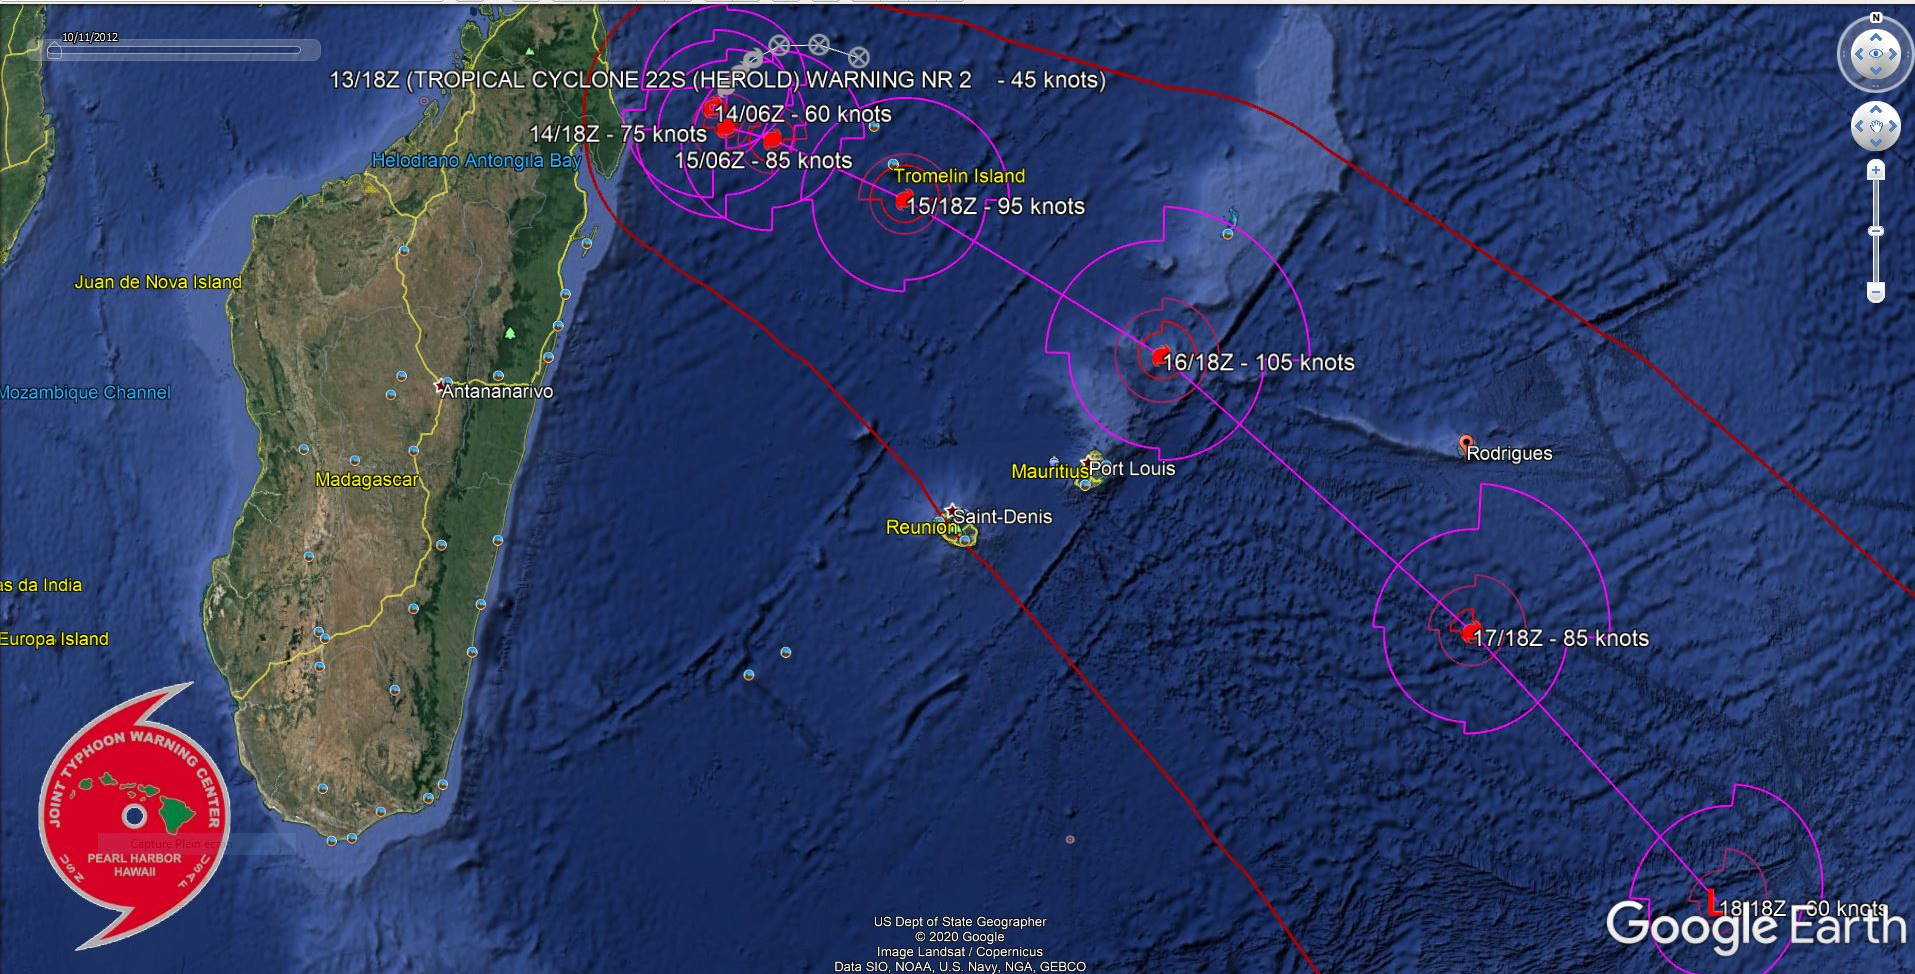 South Indian:TC 22S(HEROLD) forecast to intensify to CAT 3 US while tracking North of Mauritius